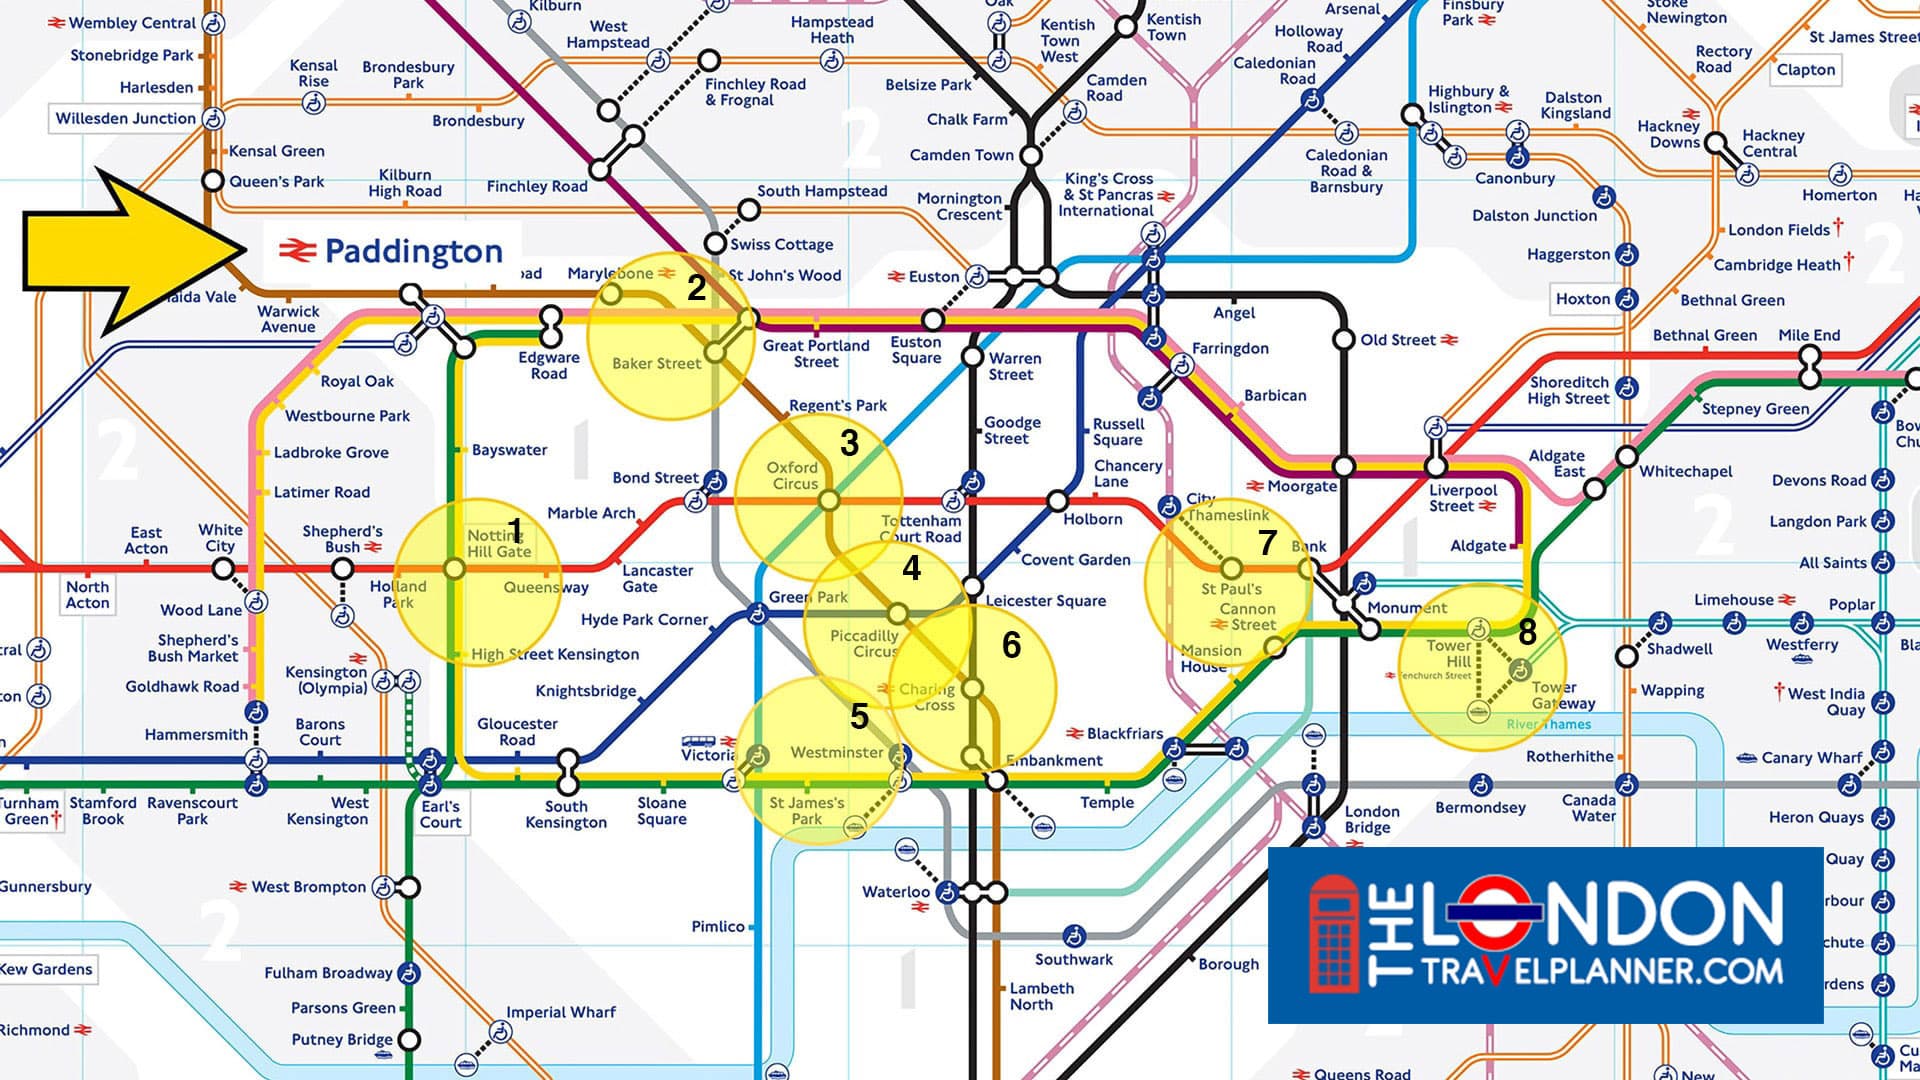 london-tube-map-with-tourist-attraction-areas-numbered-with-ltp-logo copy 2